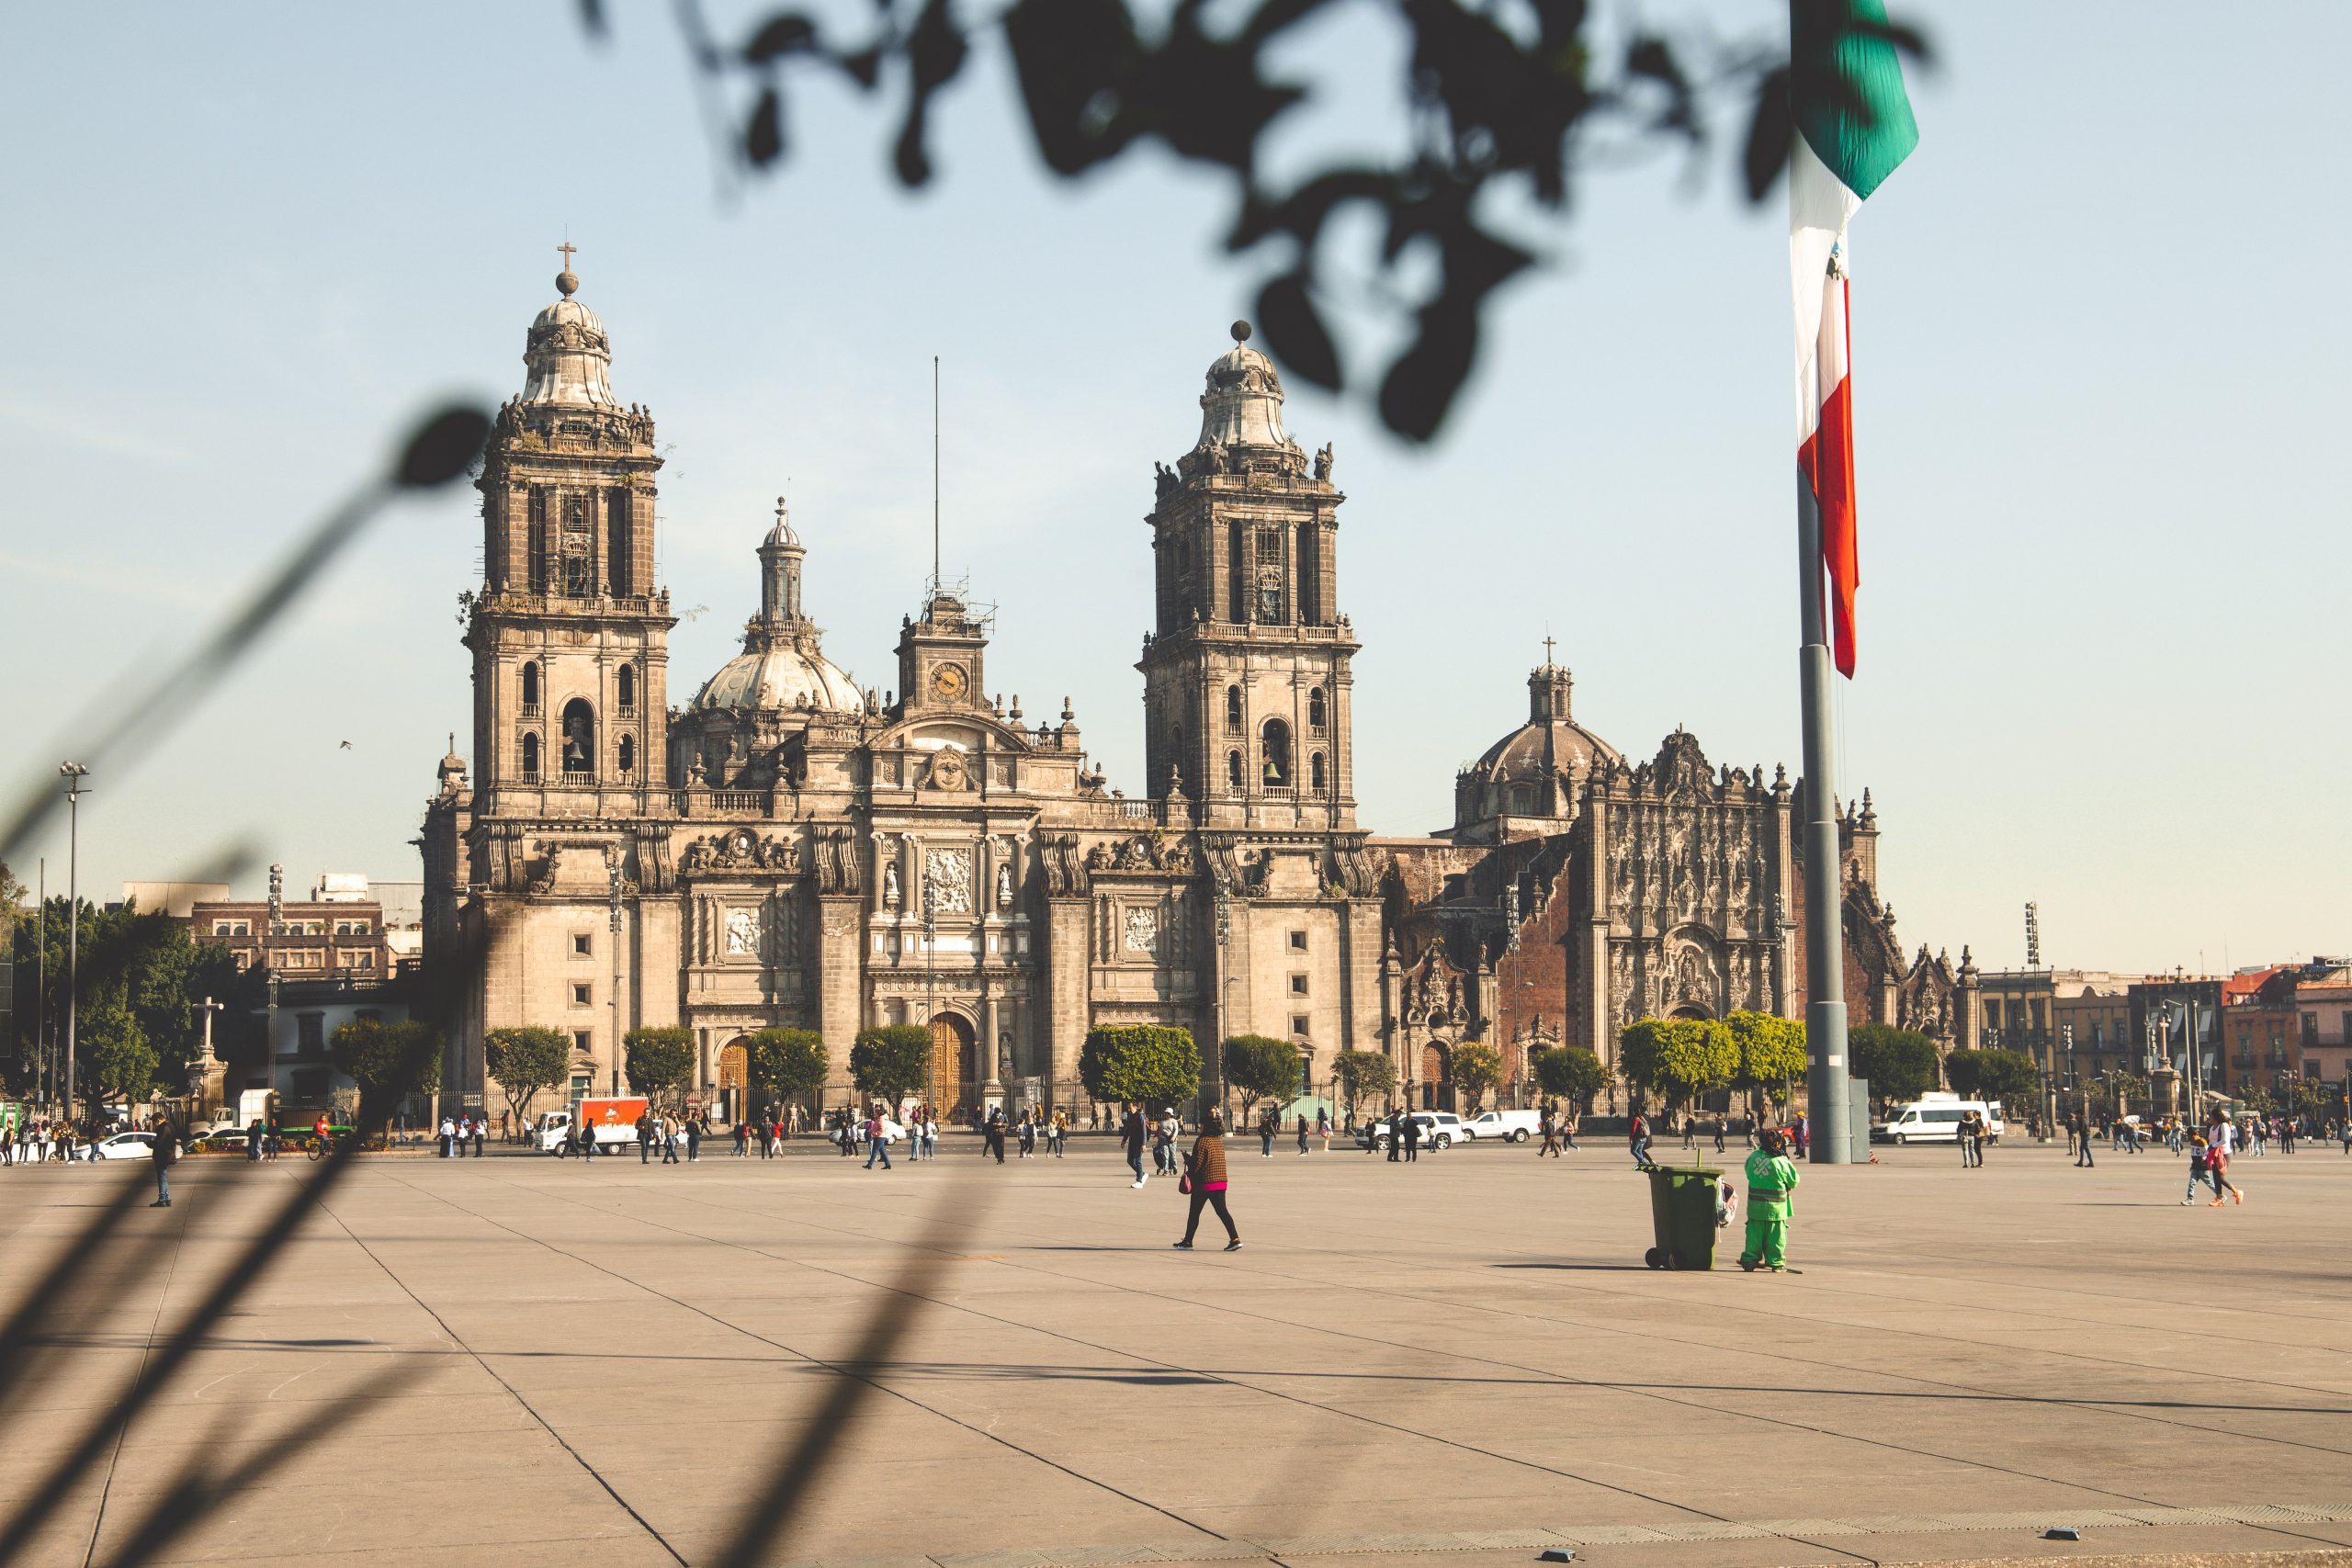 A grand building and a Mexican flag